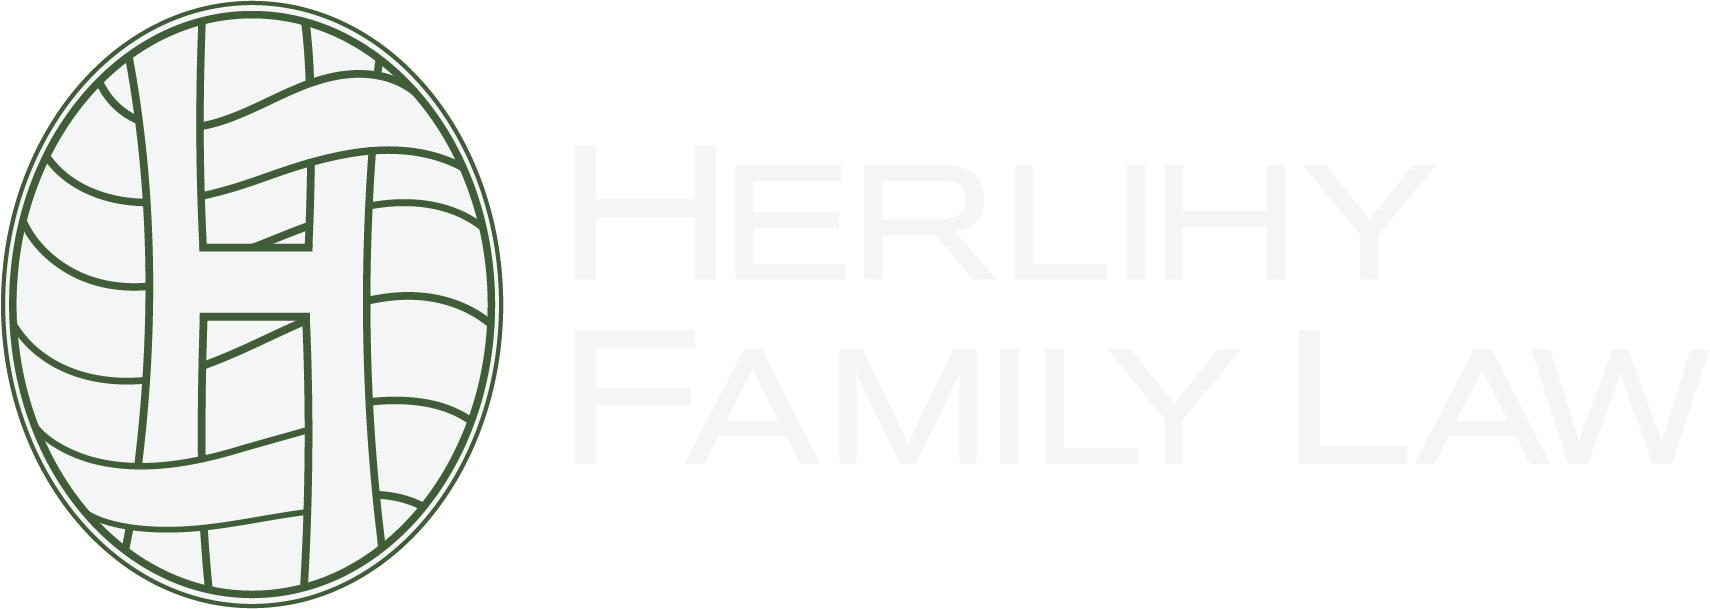 Herlihy Family Law